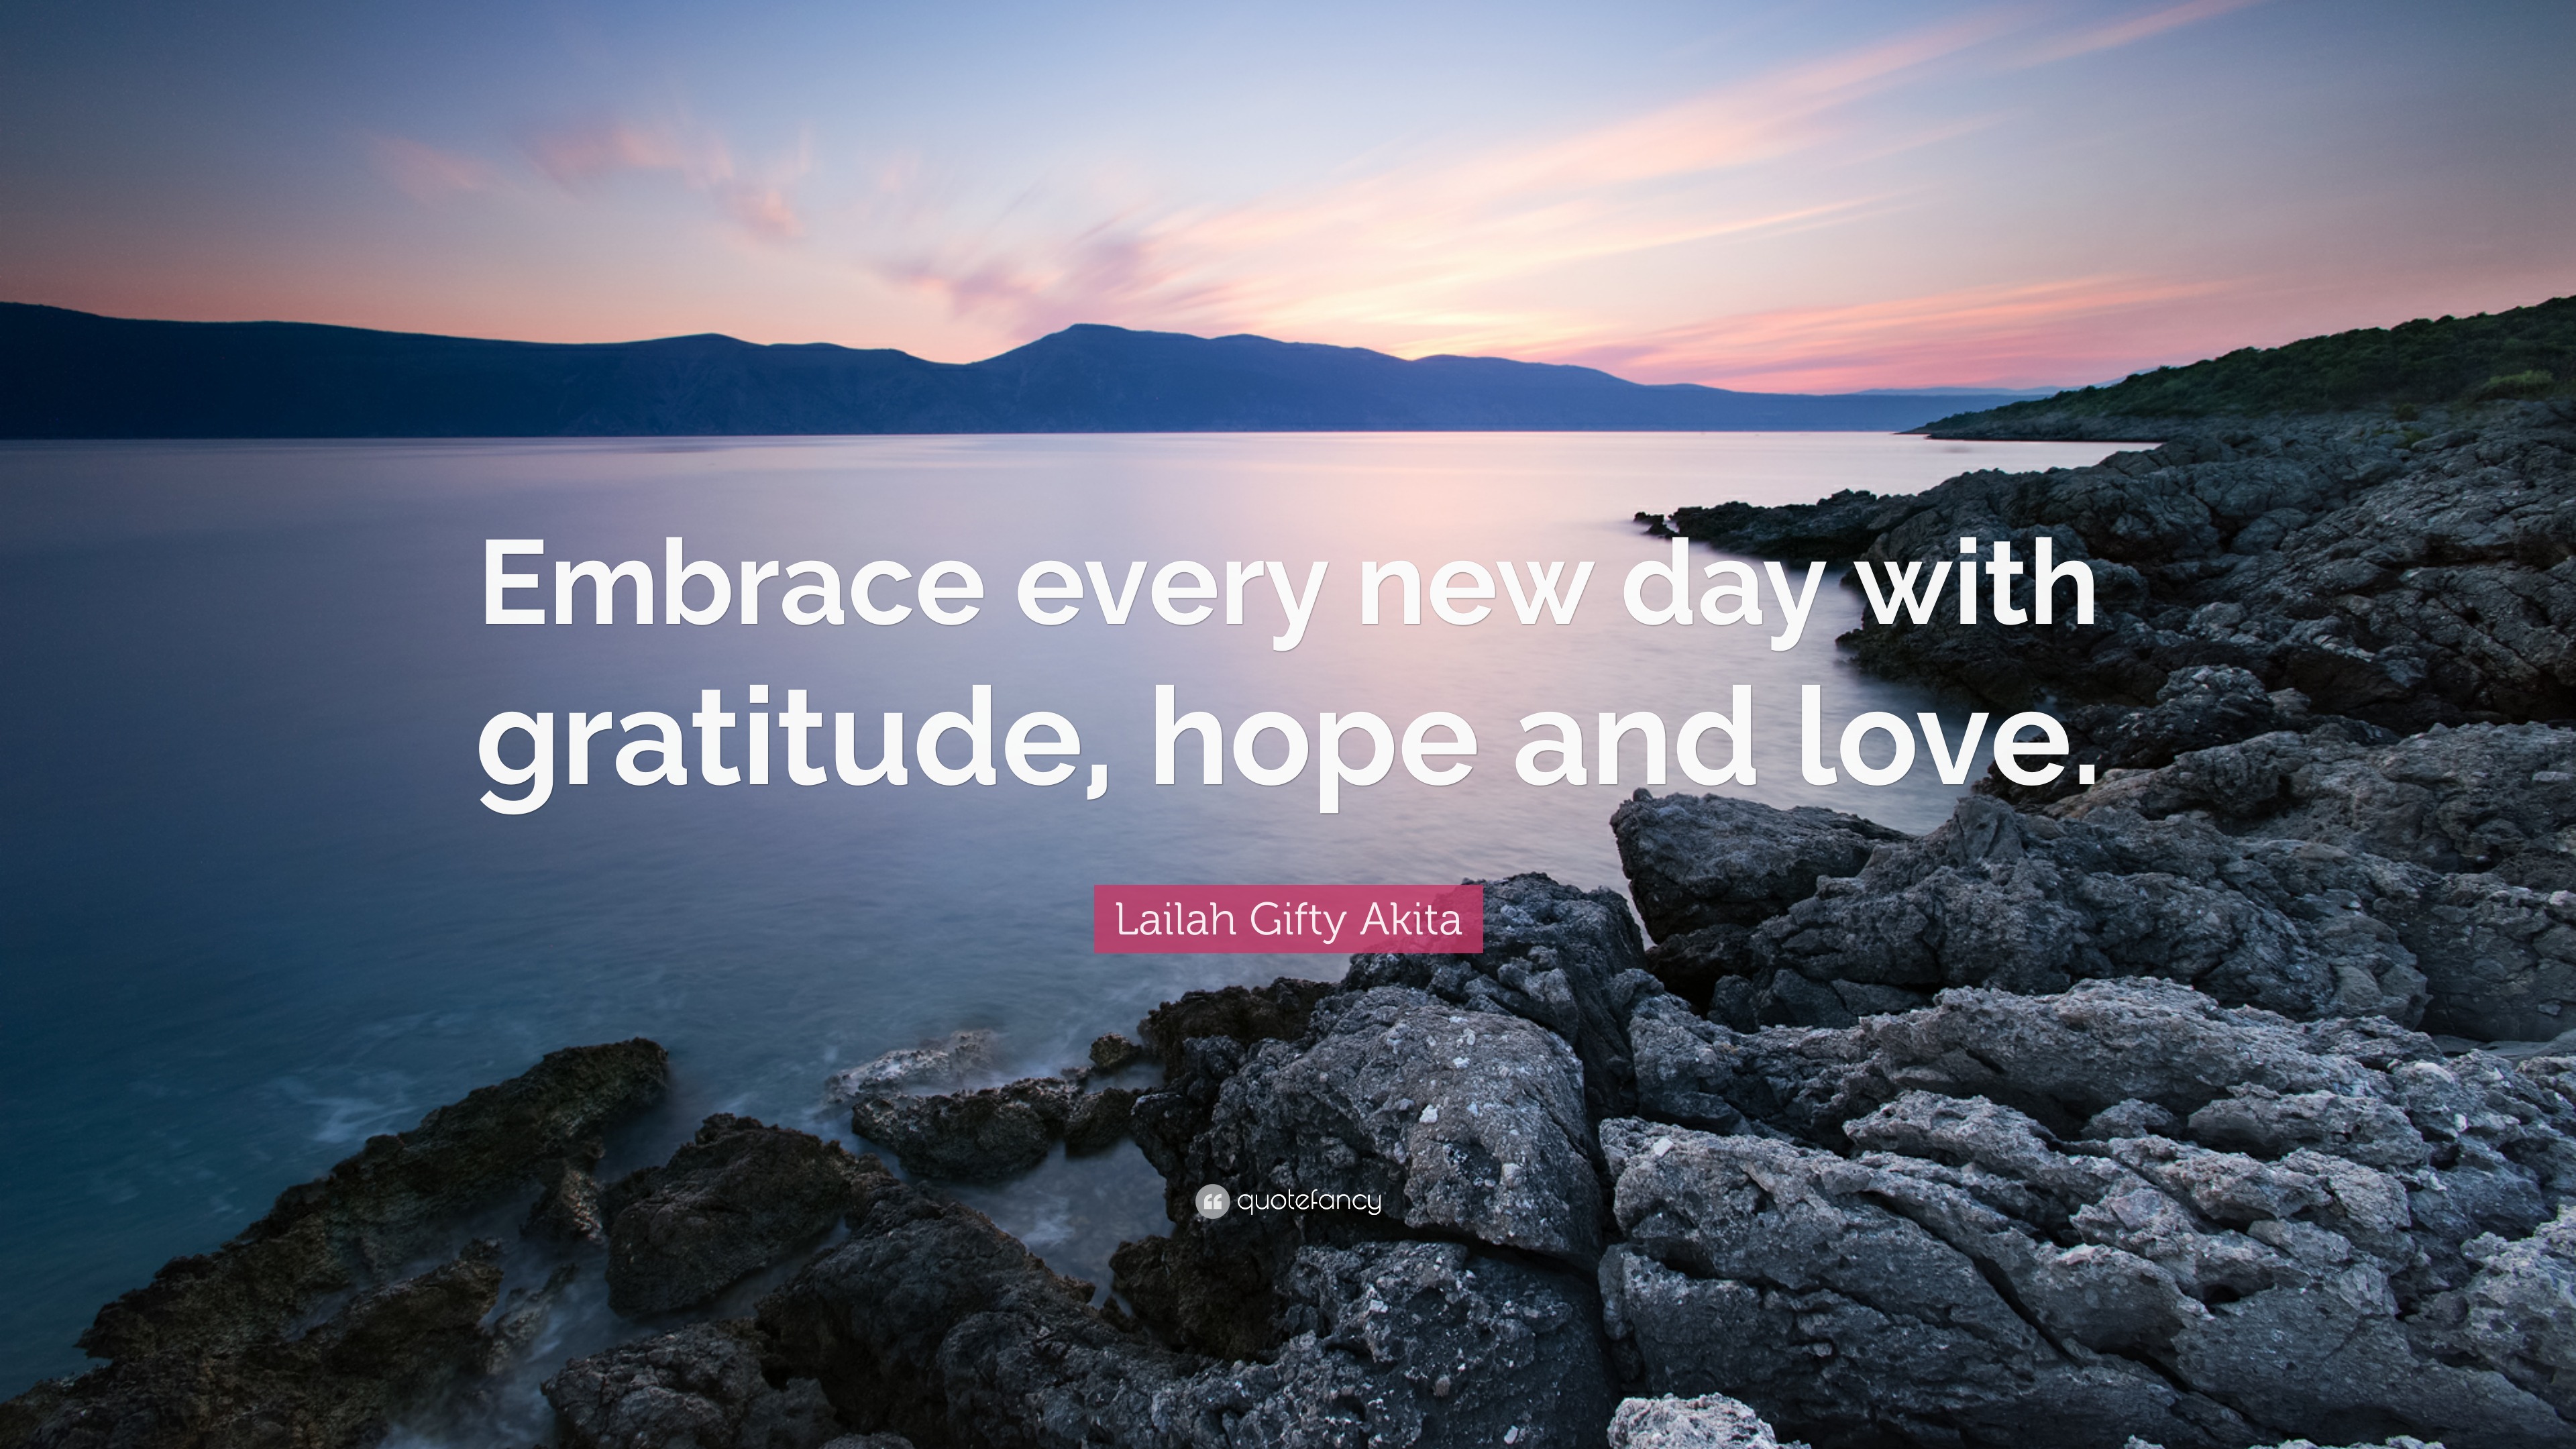 Lailah Gifty Akita Quote: “Embrace every new day with gratitude